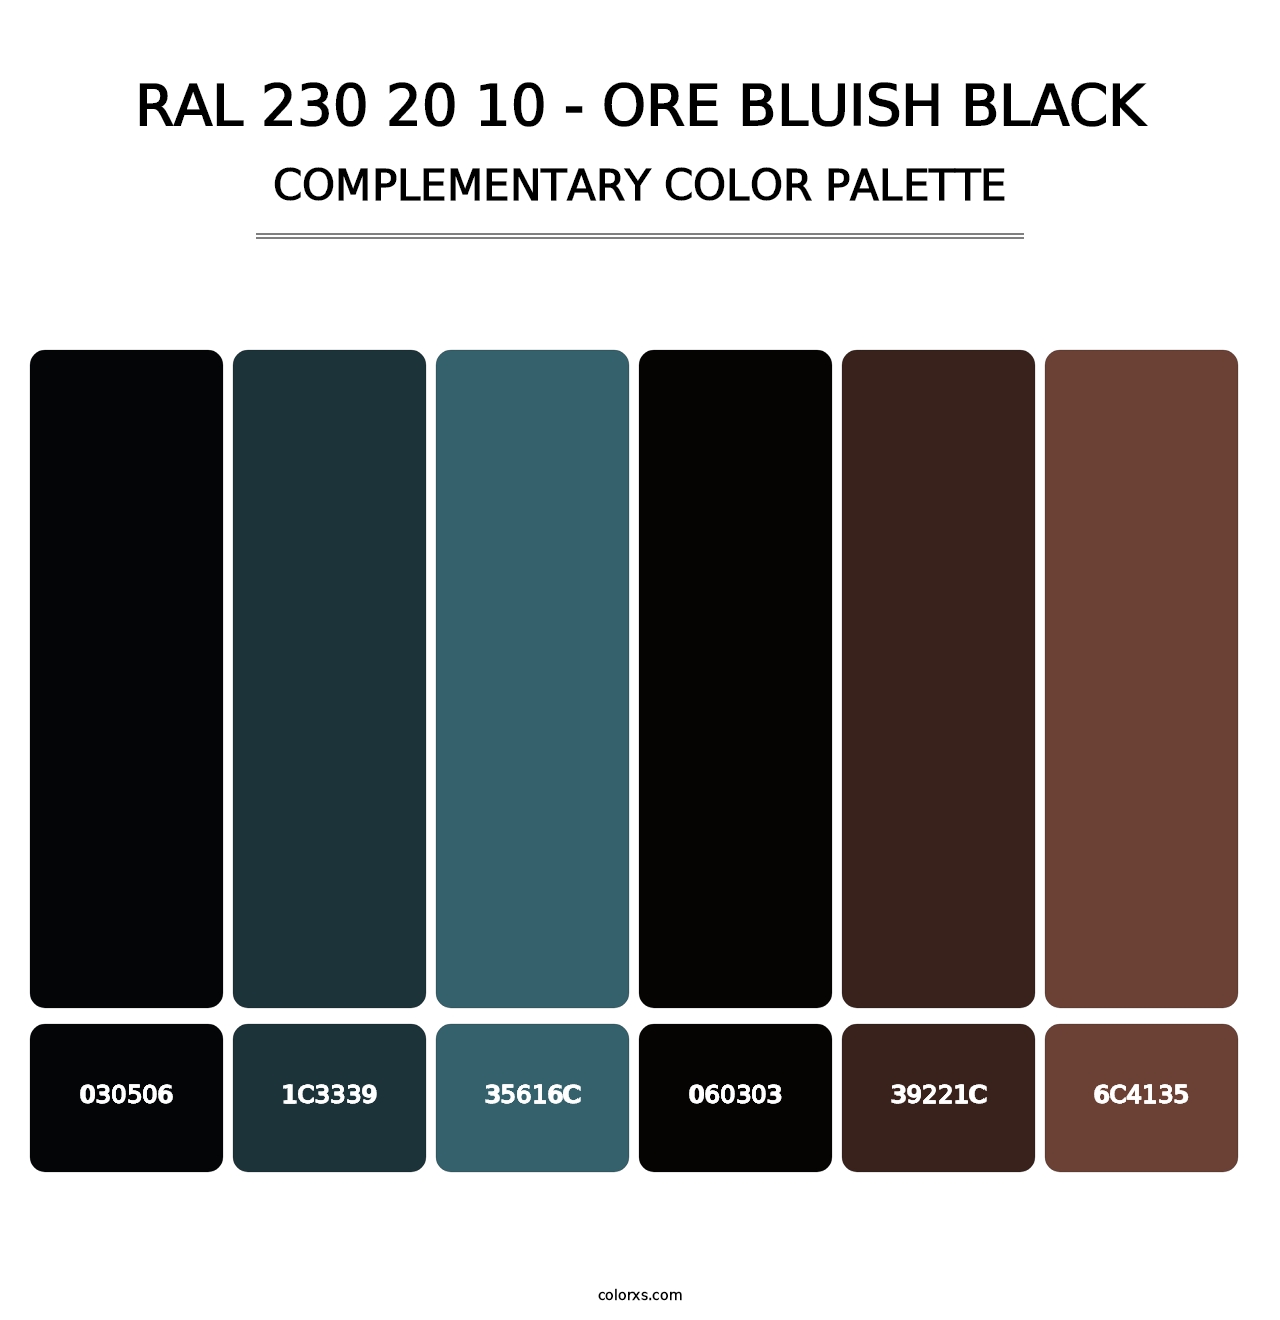 RAL 230 20 10 - Ore Bluish Black - Complementary Color Palette